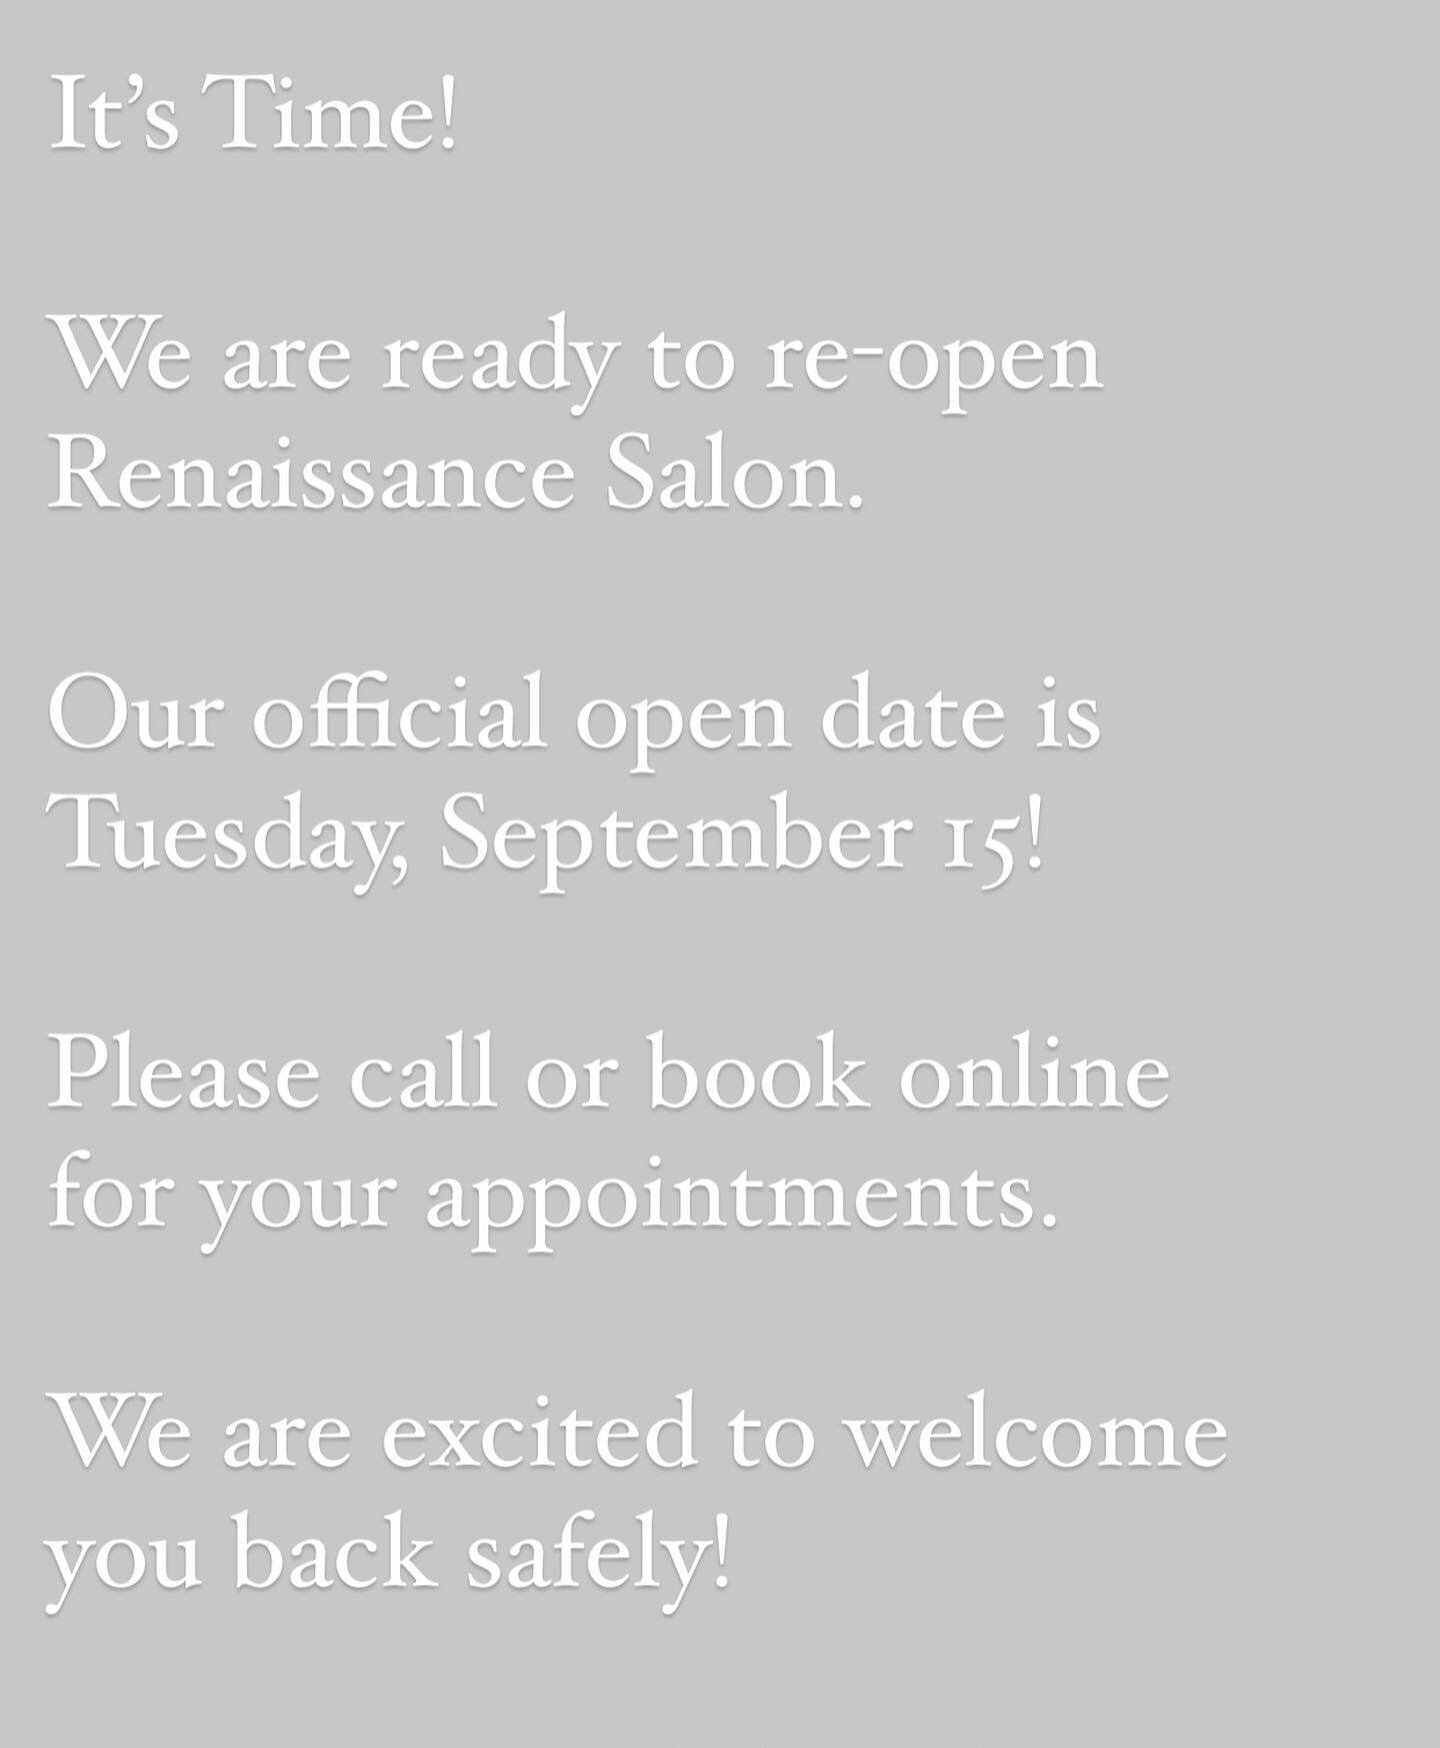 Bringing Beautiful Back, Take 2. Now taking appointments over the phone or online for our re-opening on Tuesday, September 15!